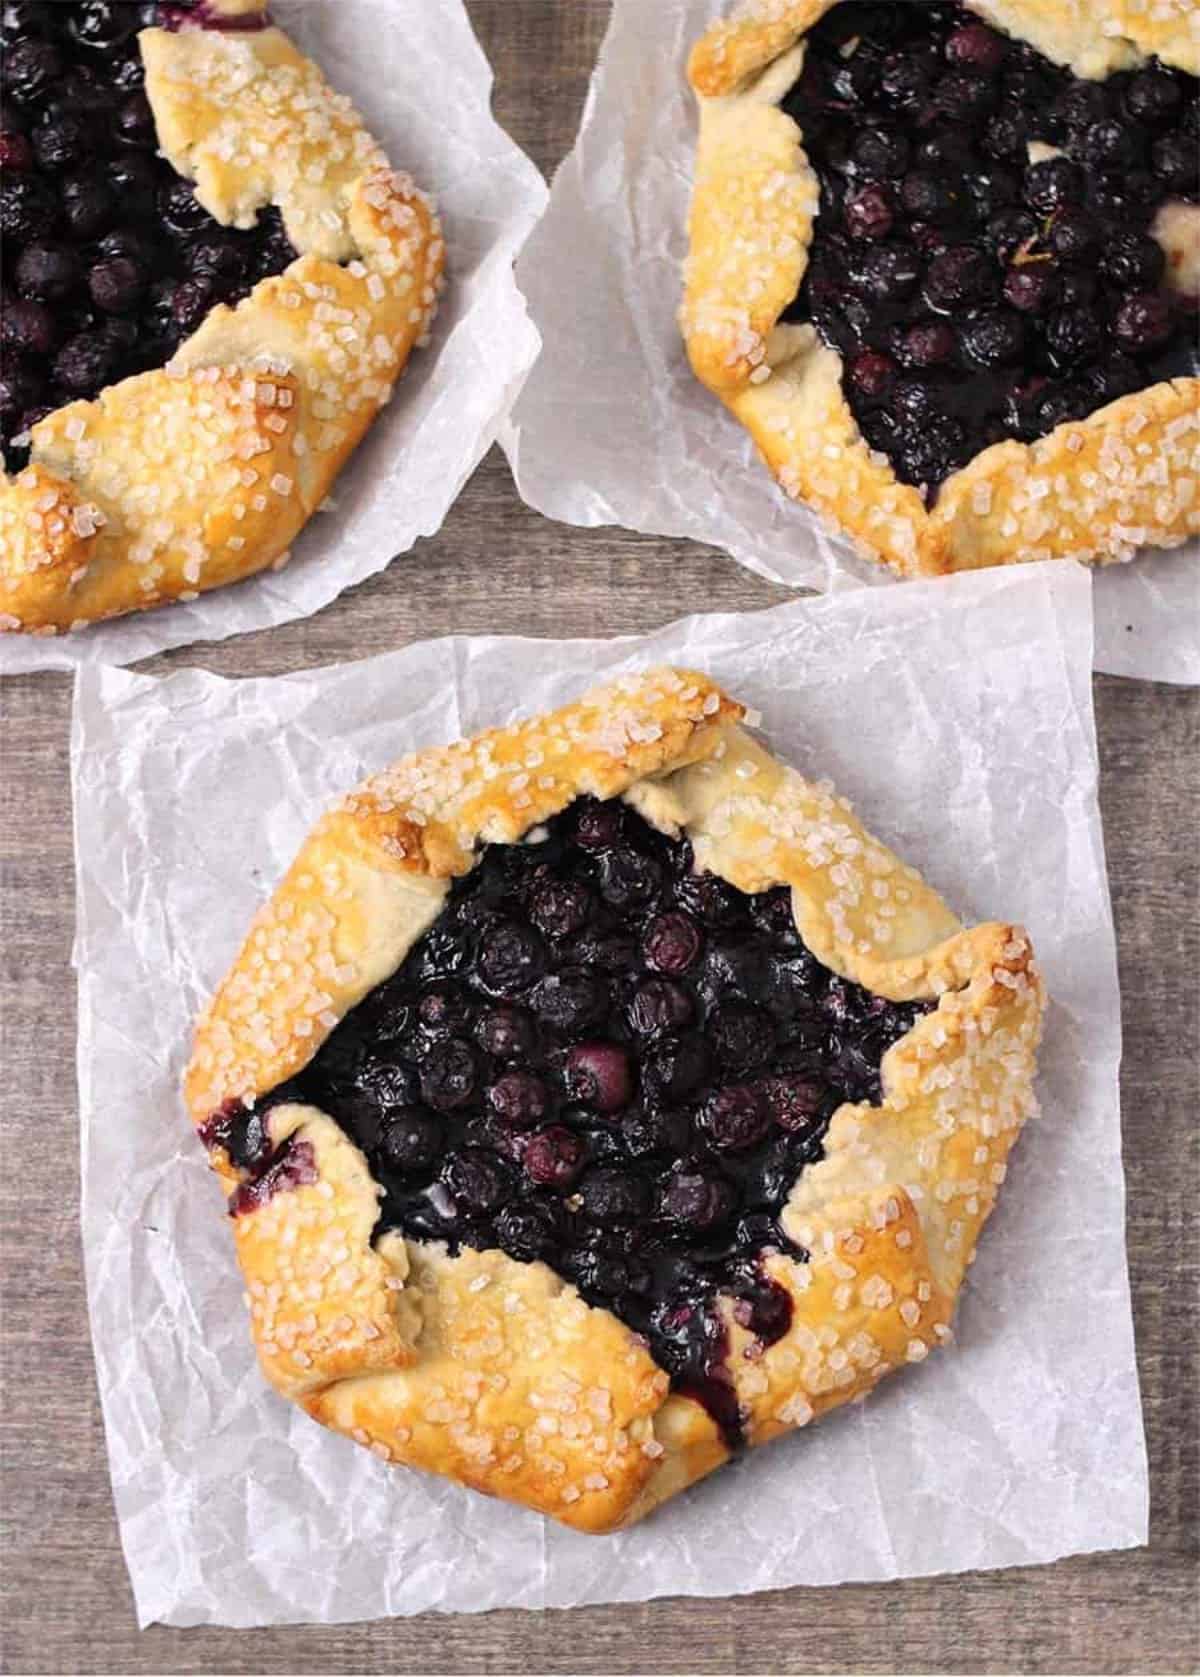 Mini blueberry galettes or crostatas on white parchment paper.